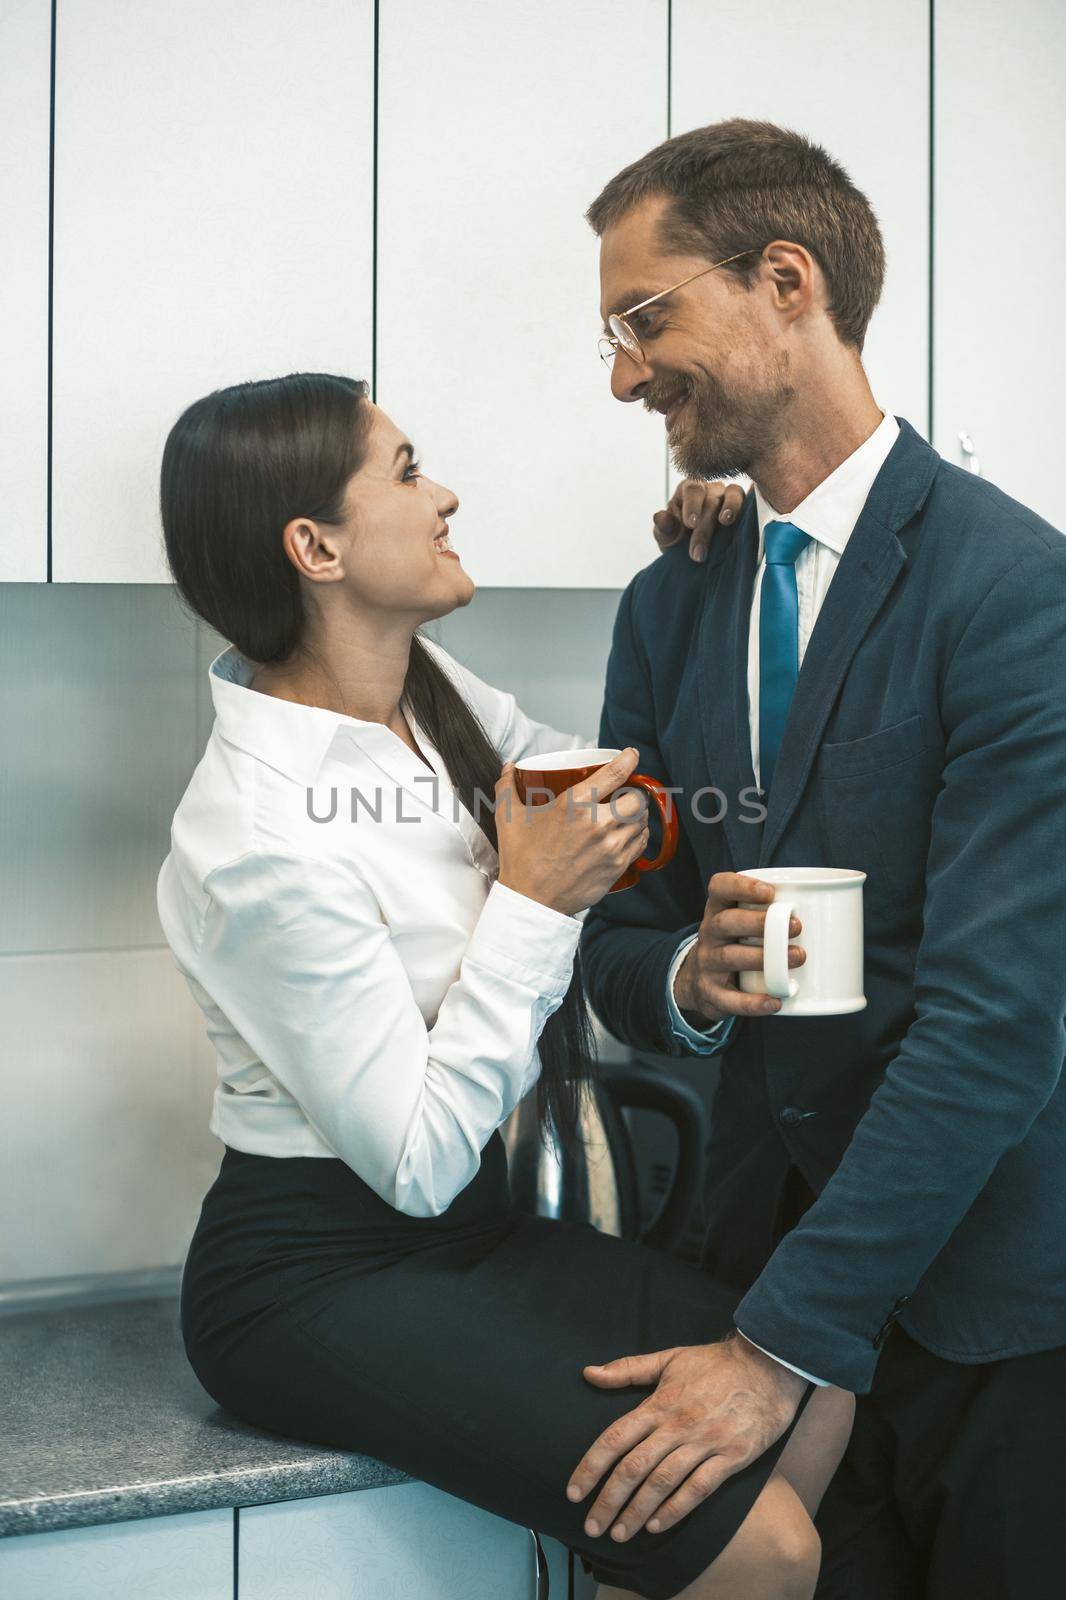 Couple drinking coffee and flirting during lunchtime. Smiling man and woman hold cups of hot drinks looking each other. Office romance concept. High quality photo.